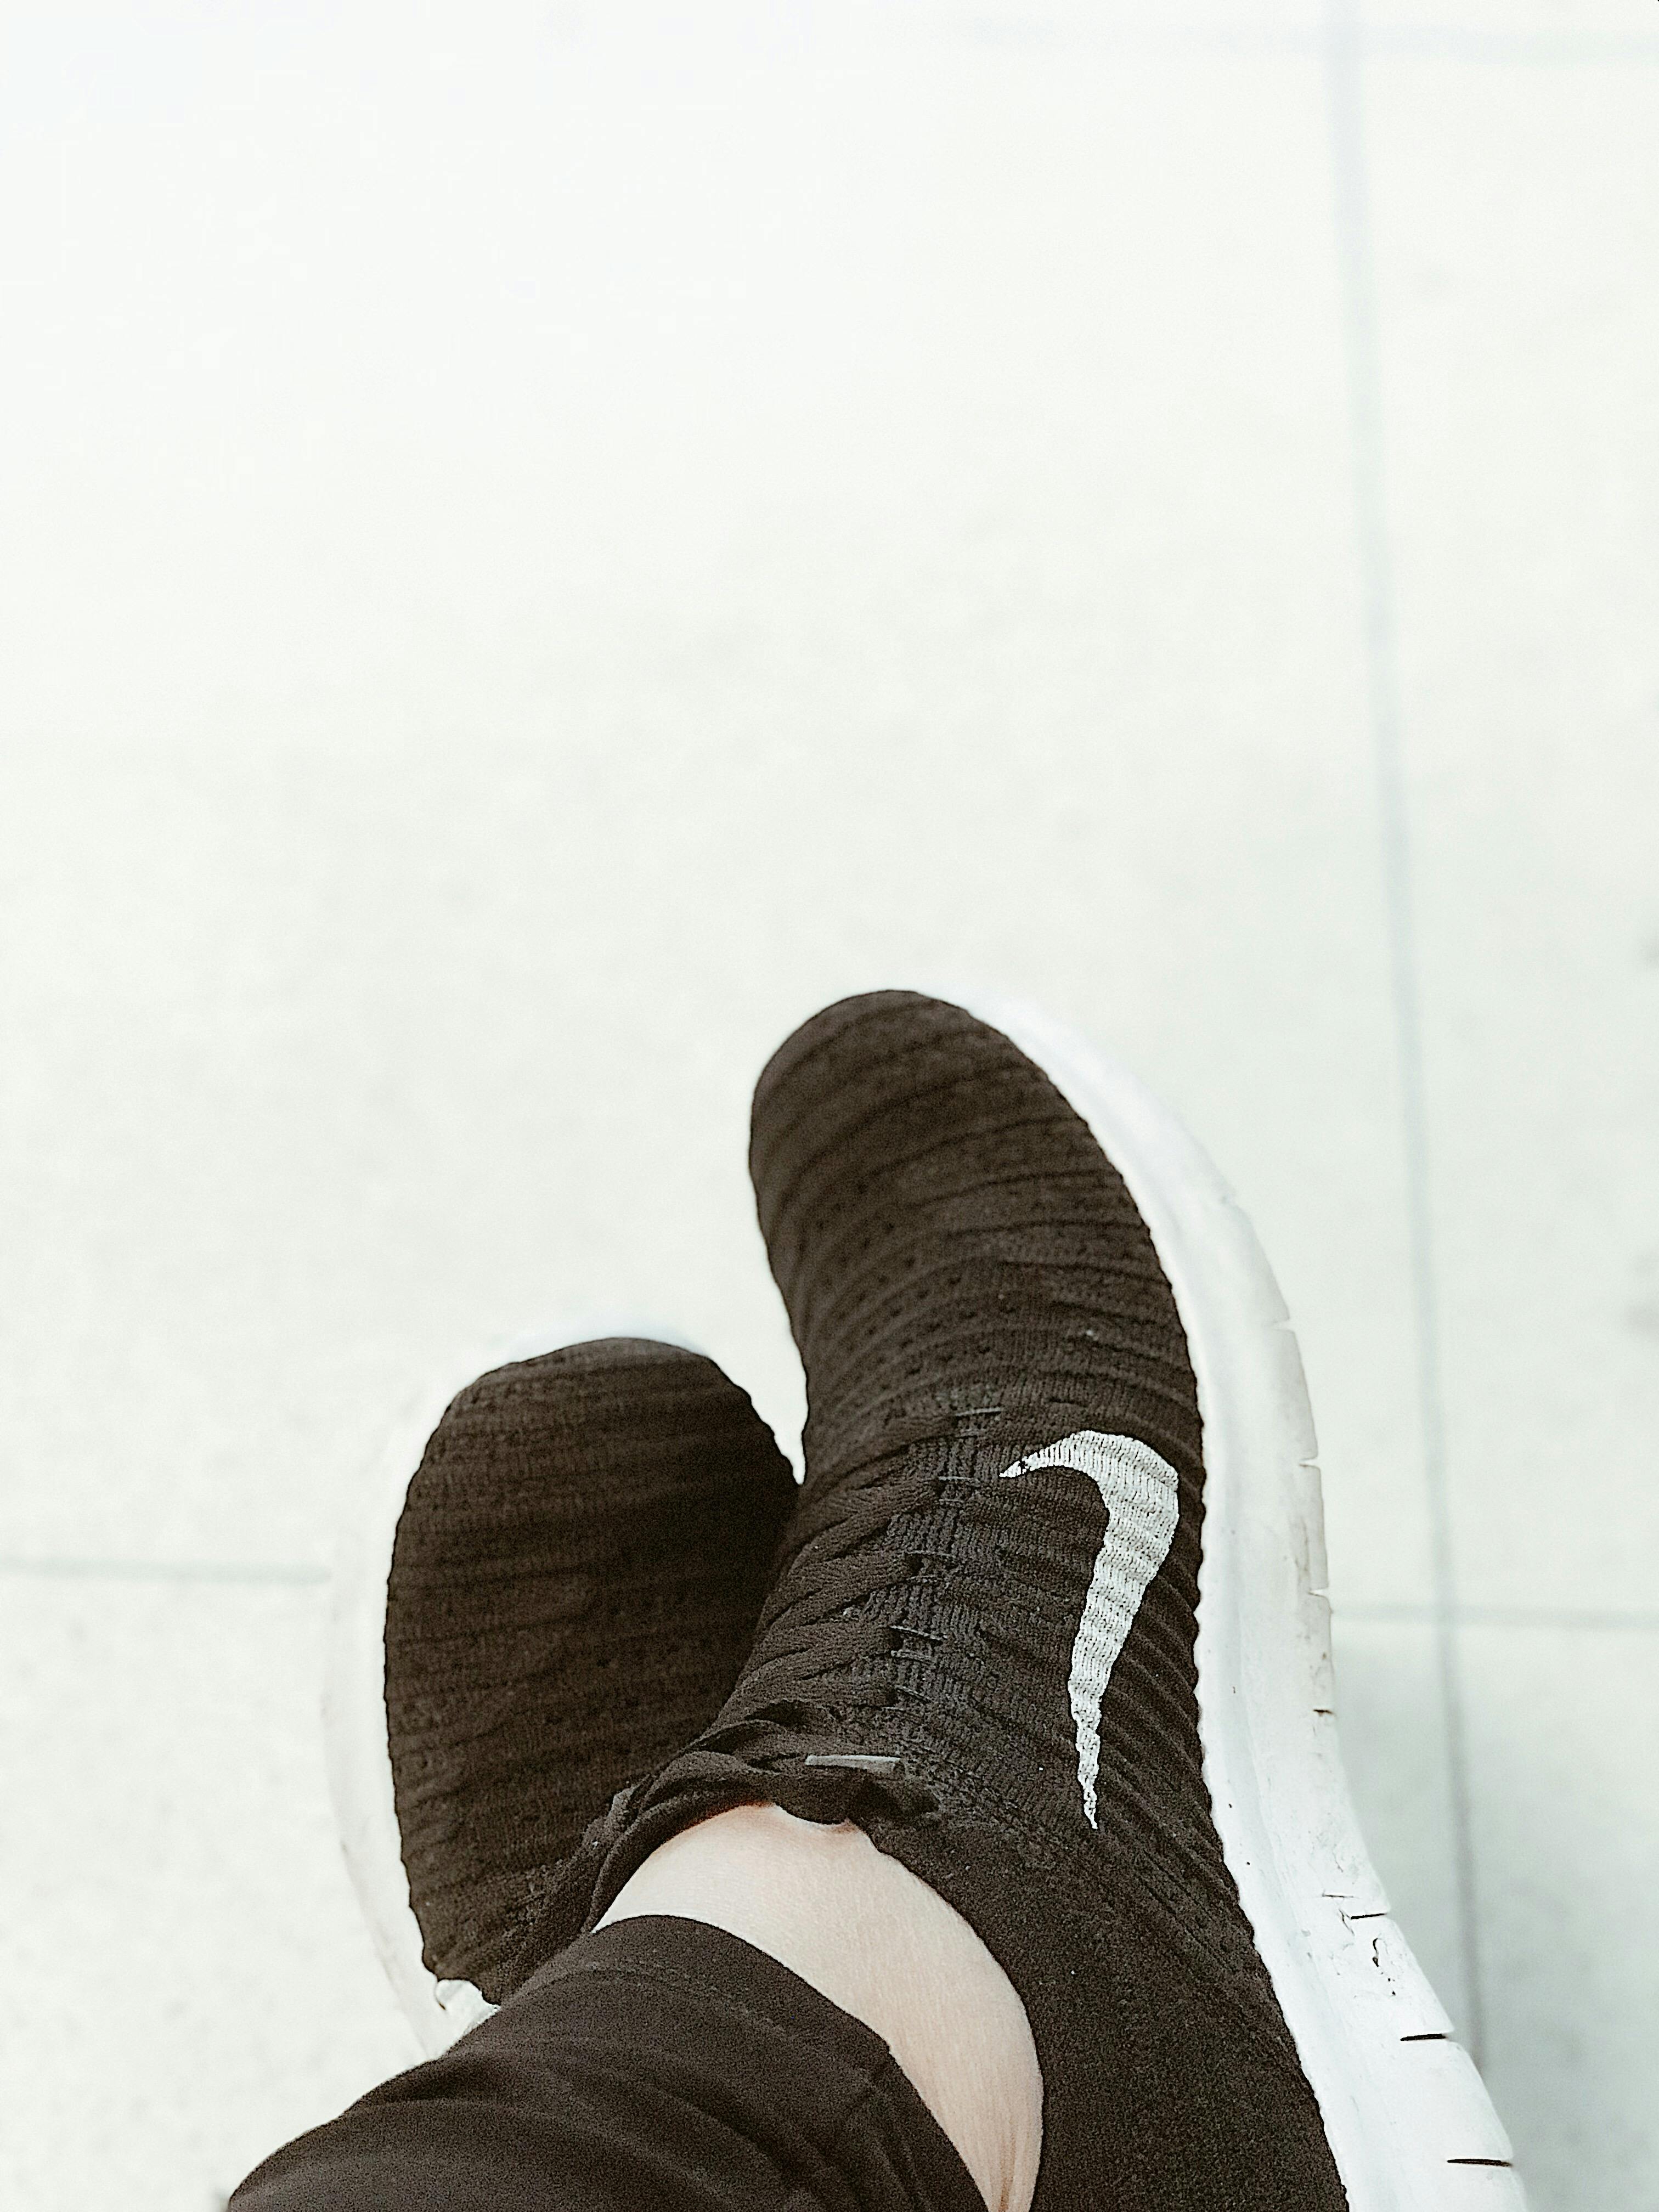 A Person Wearing Black and White Nike Sneakers · Free Stock Photo